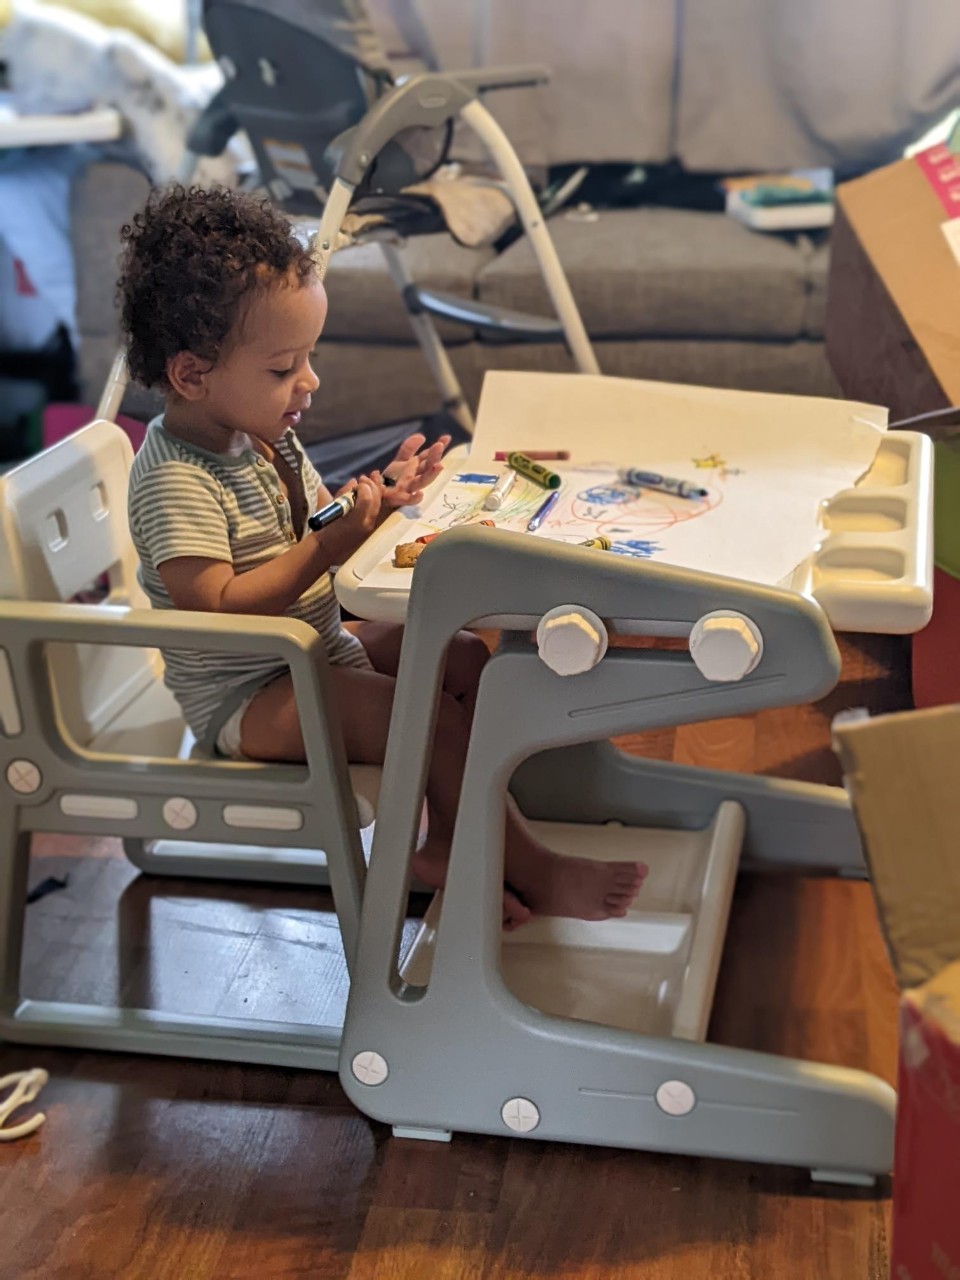 a toddler with curly black hair sits at a child's art table with crayons and paper on the desk in front of him